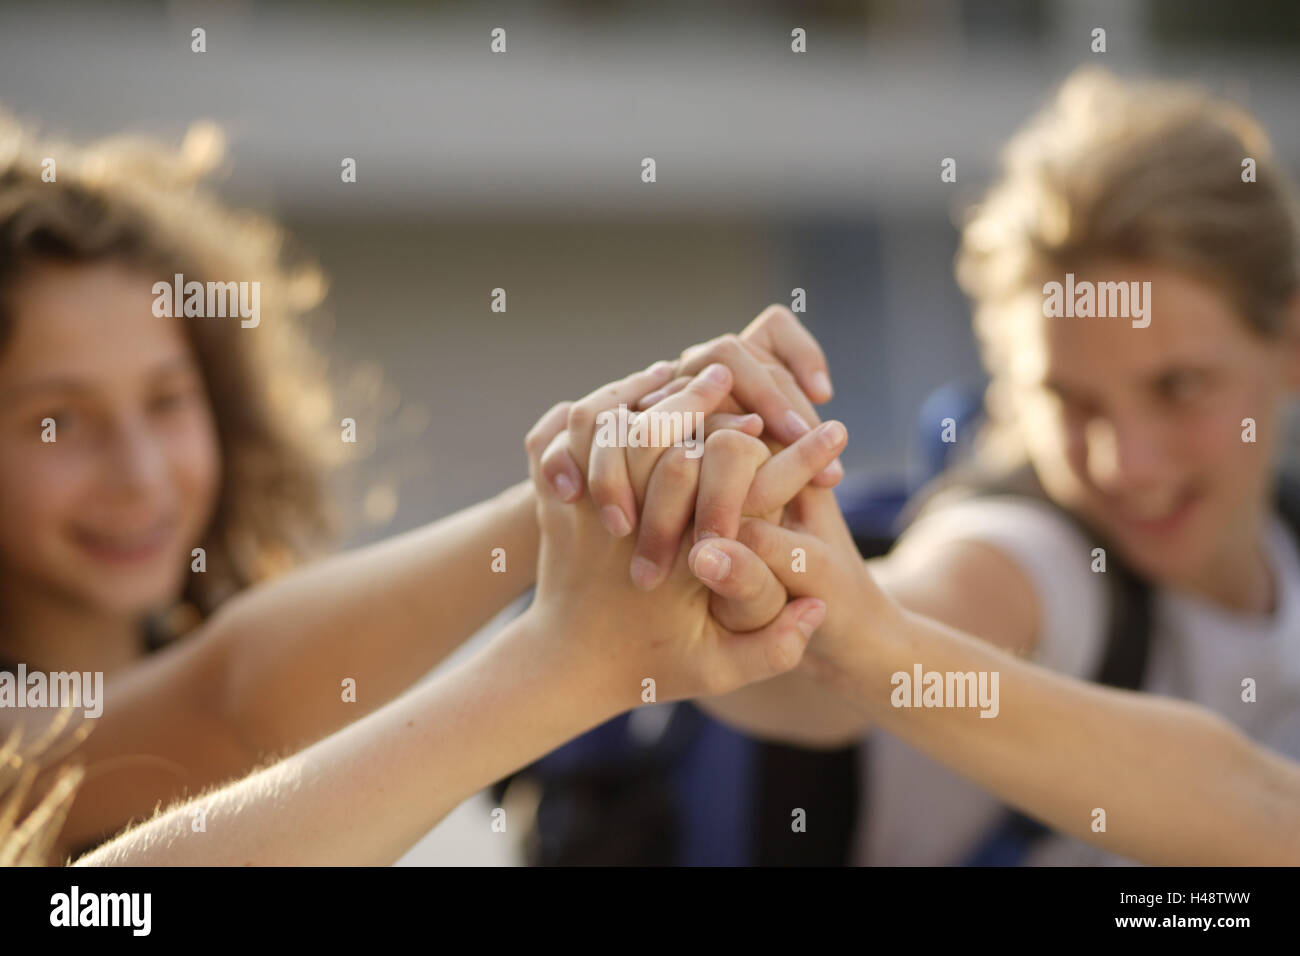 Girls, friends, hands, icon, friendship, cohesion, medium close-up, detail, Stock Photo